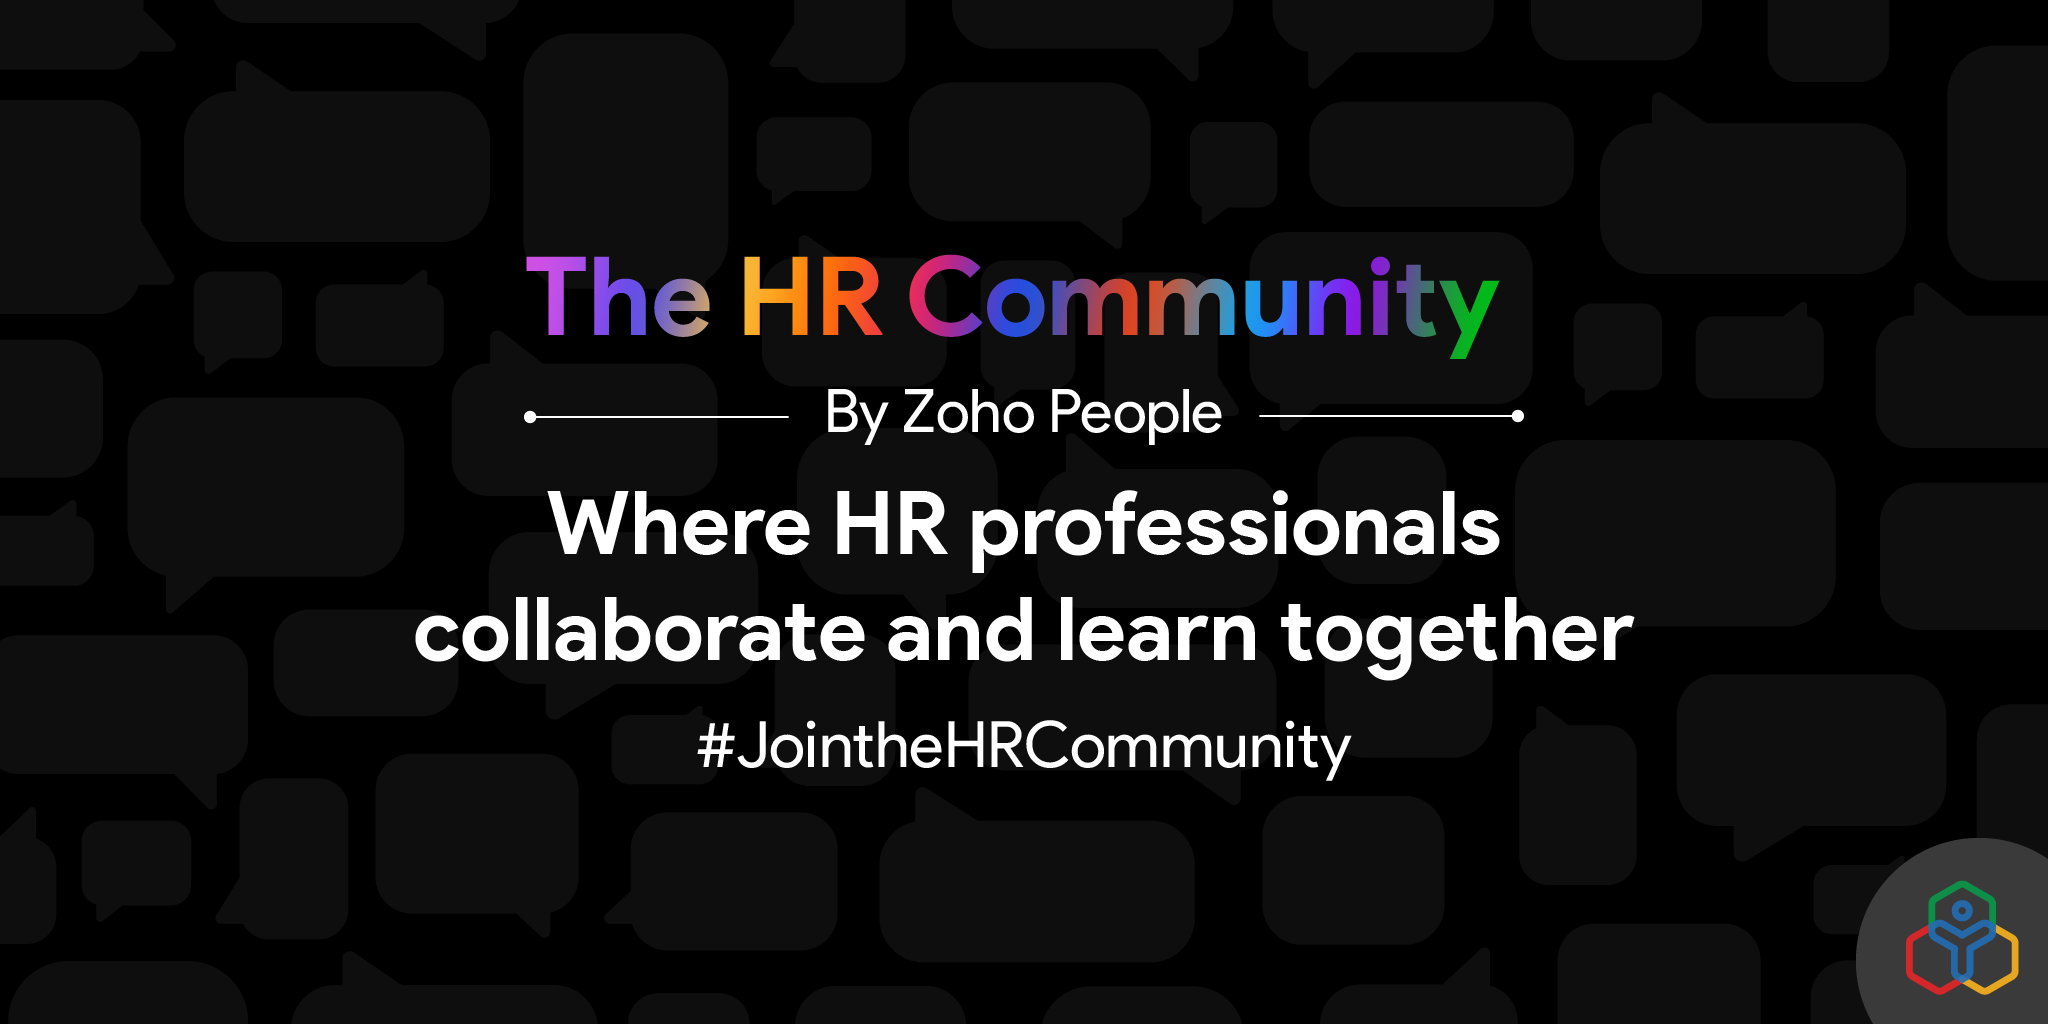 Introducing the HR Community, by Zoho People